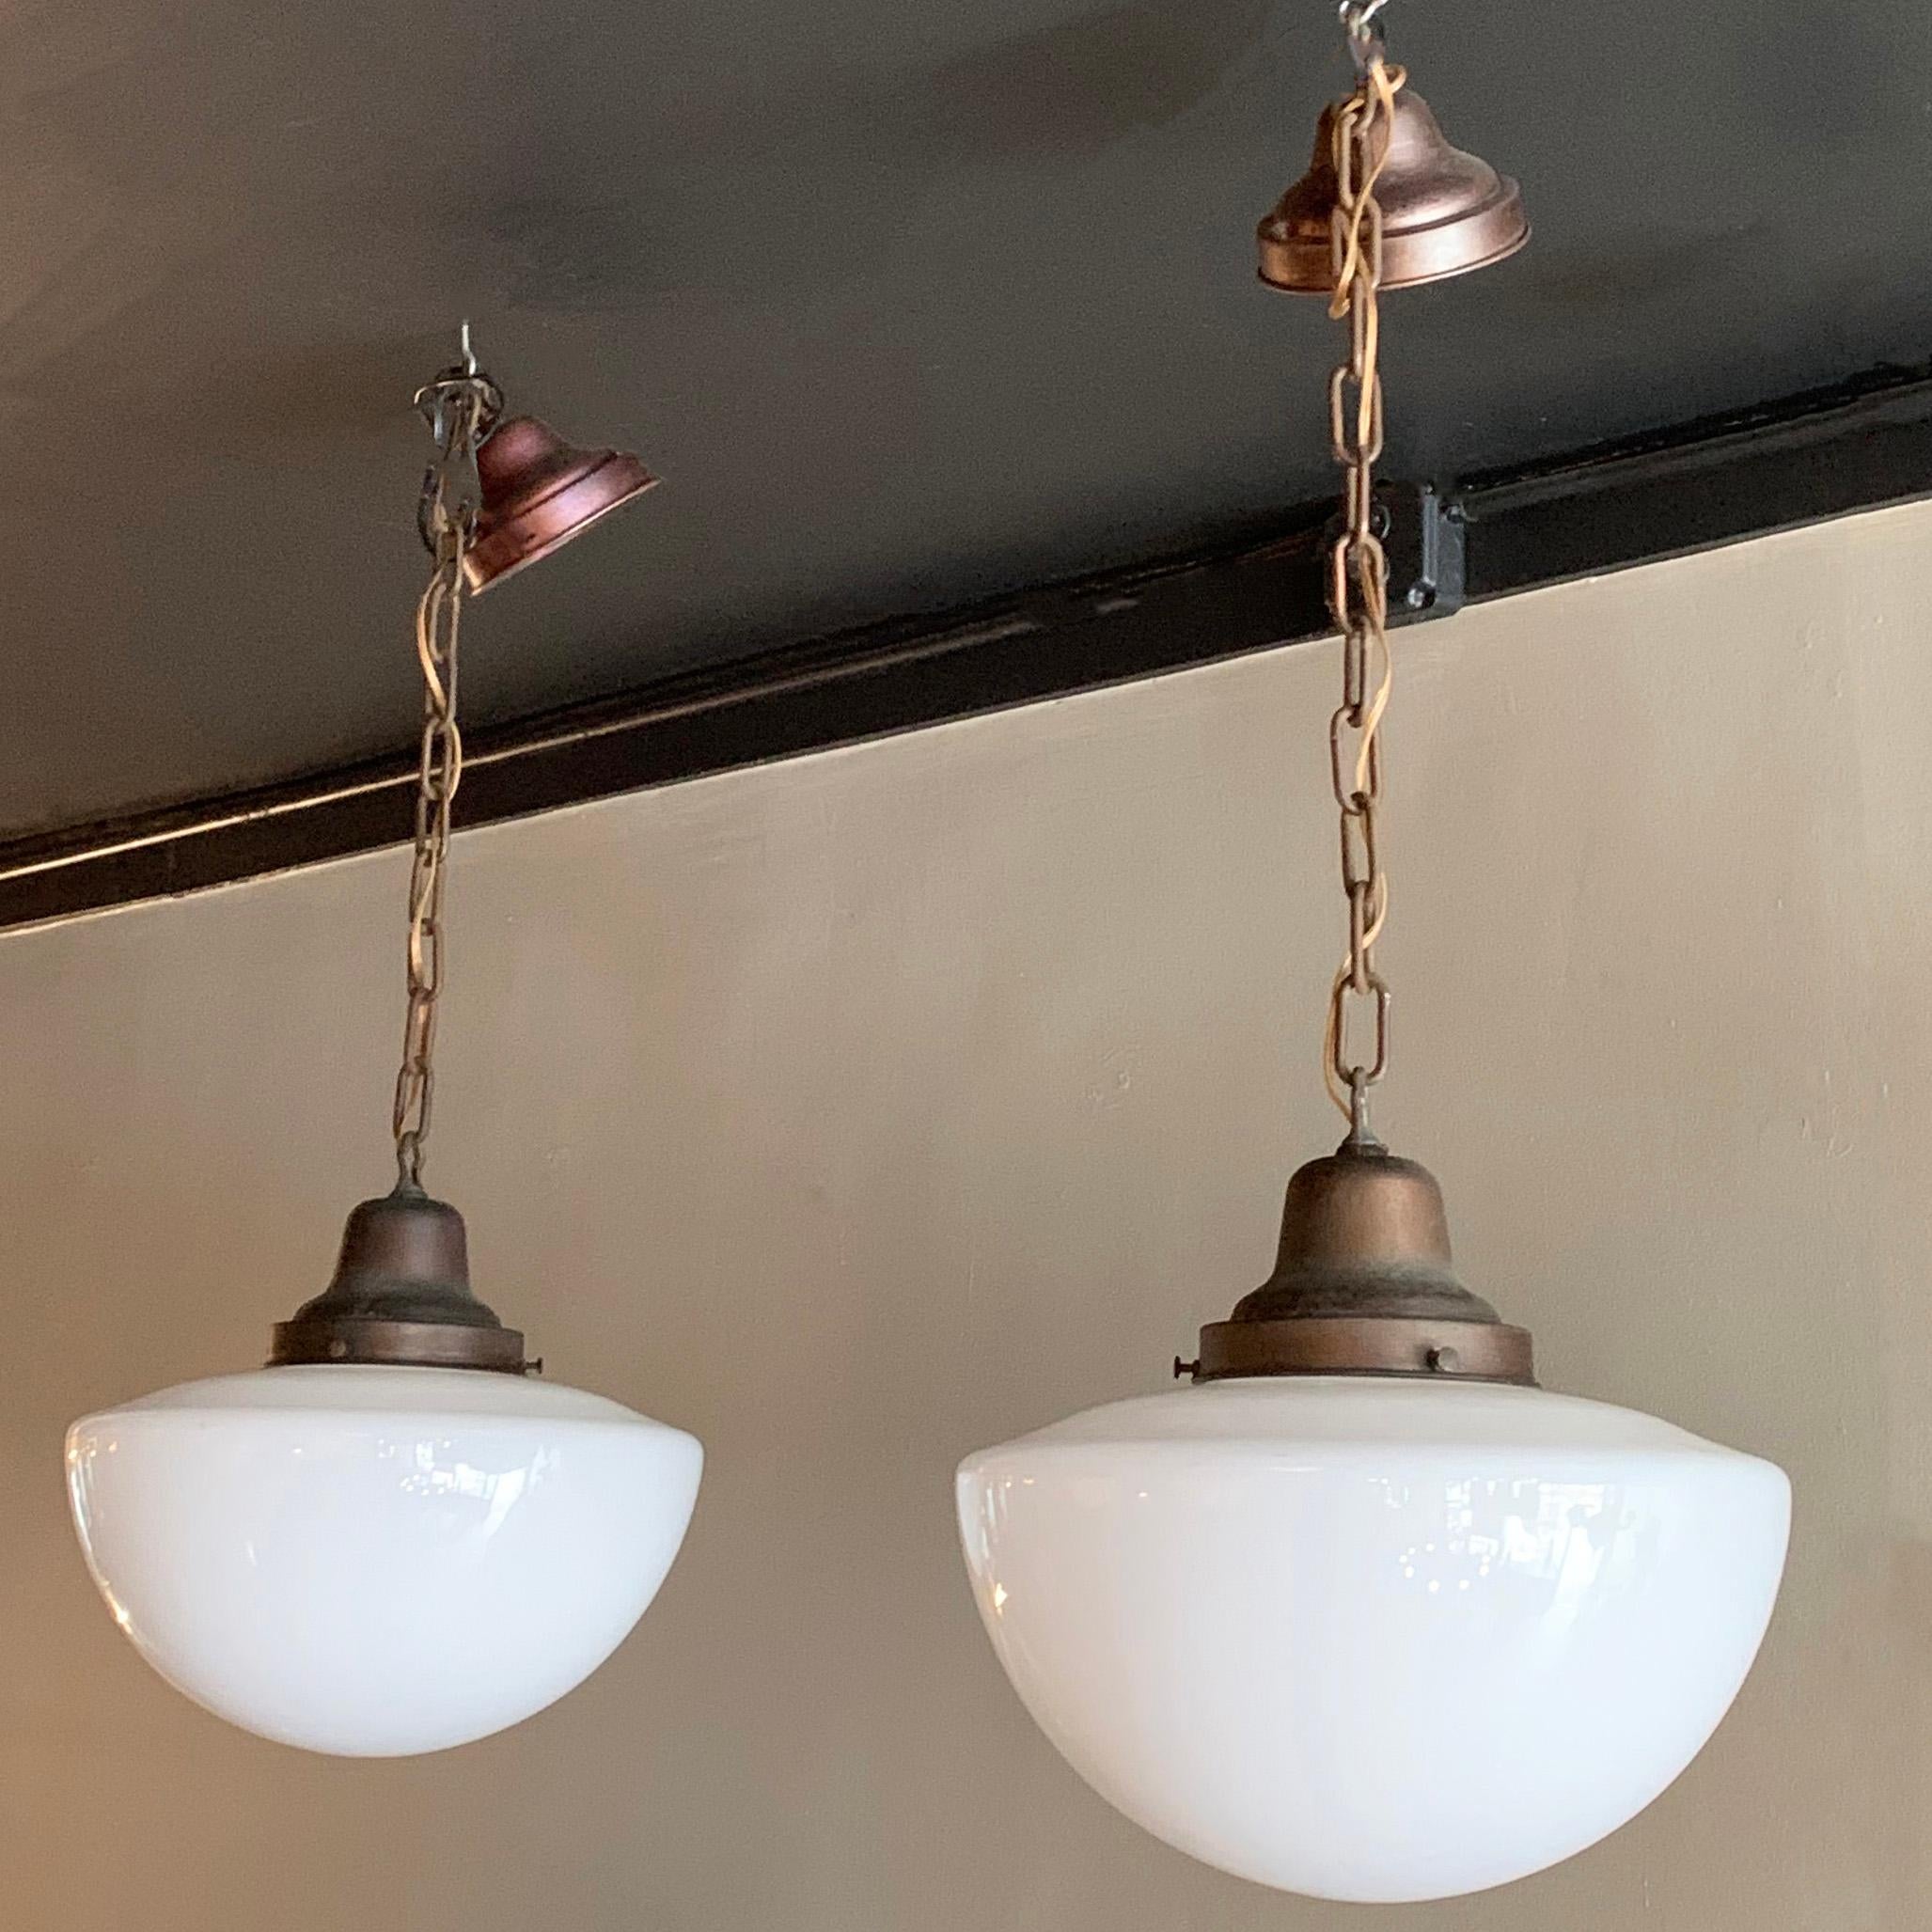 Pair of Industrial, library pendant lights feature button-shaped milk glass shades on brass fitters, chains and canopies that hang down 40 inches using all the chain. The pendants are newly wired to accept up to one 200 watt bulb each.